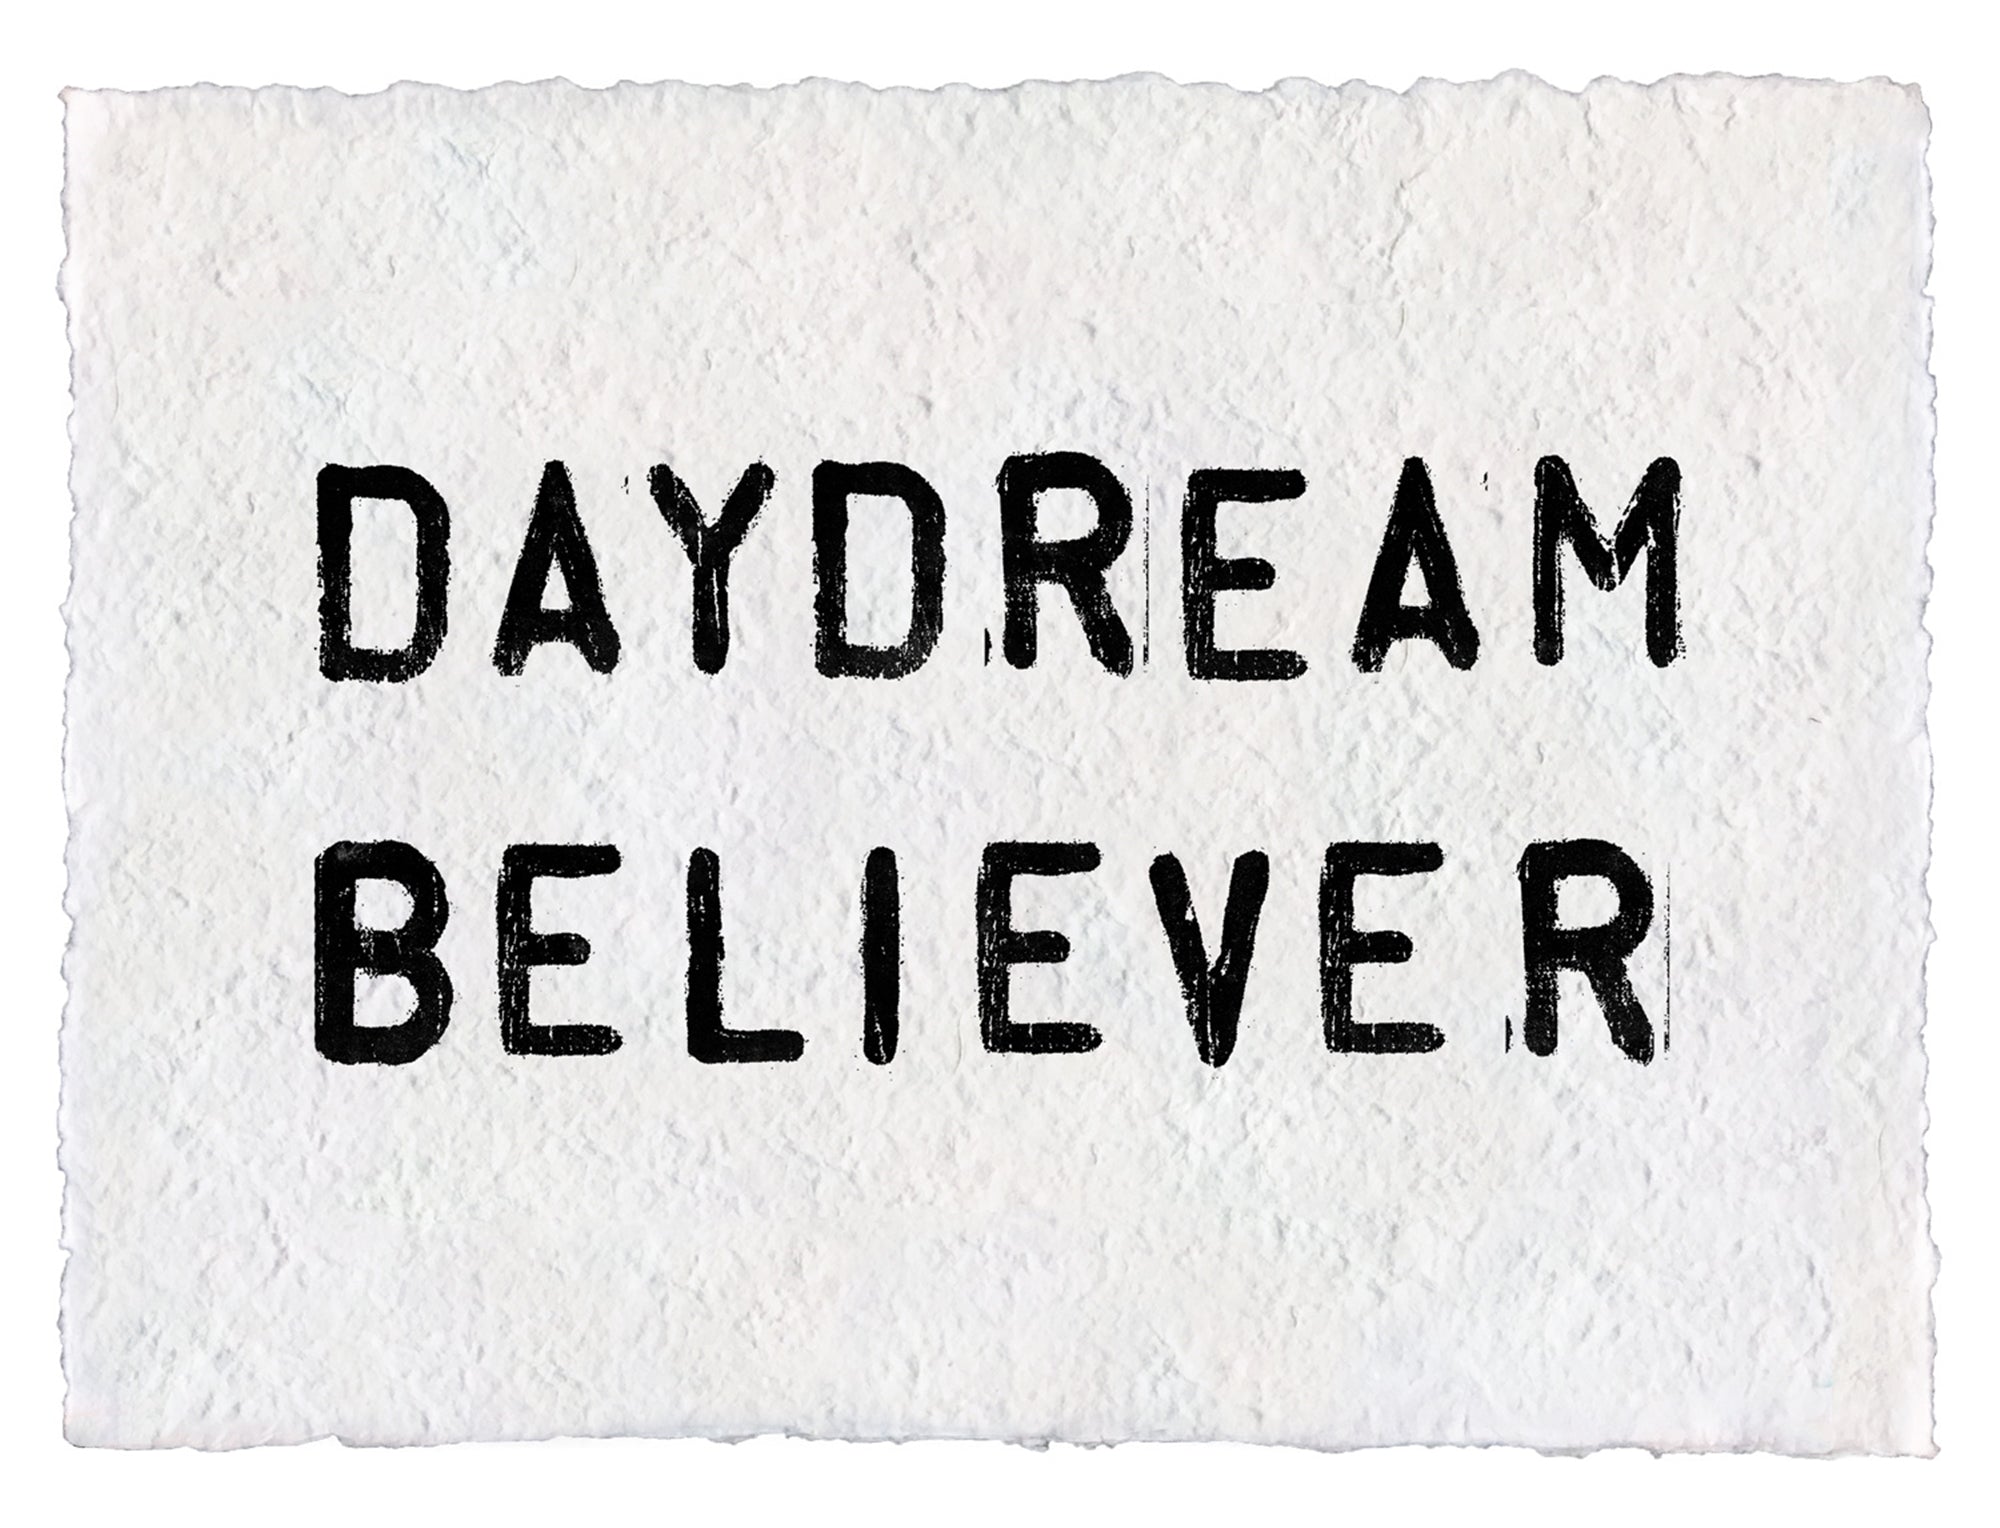 56yrs ago on this day in music Daydream Believer composed by